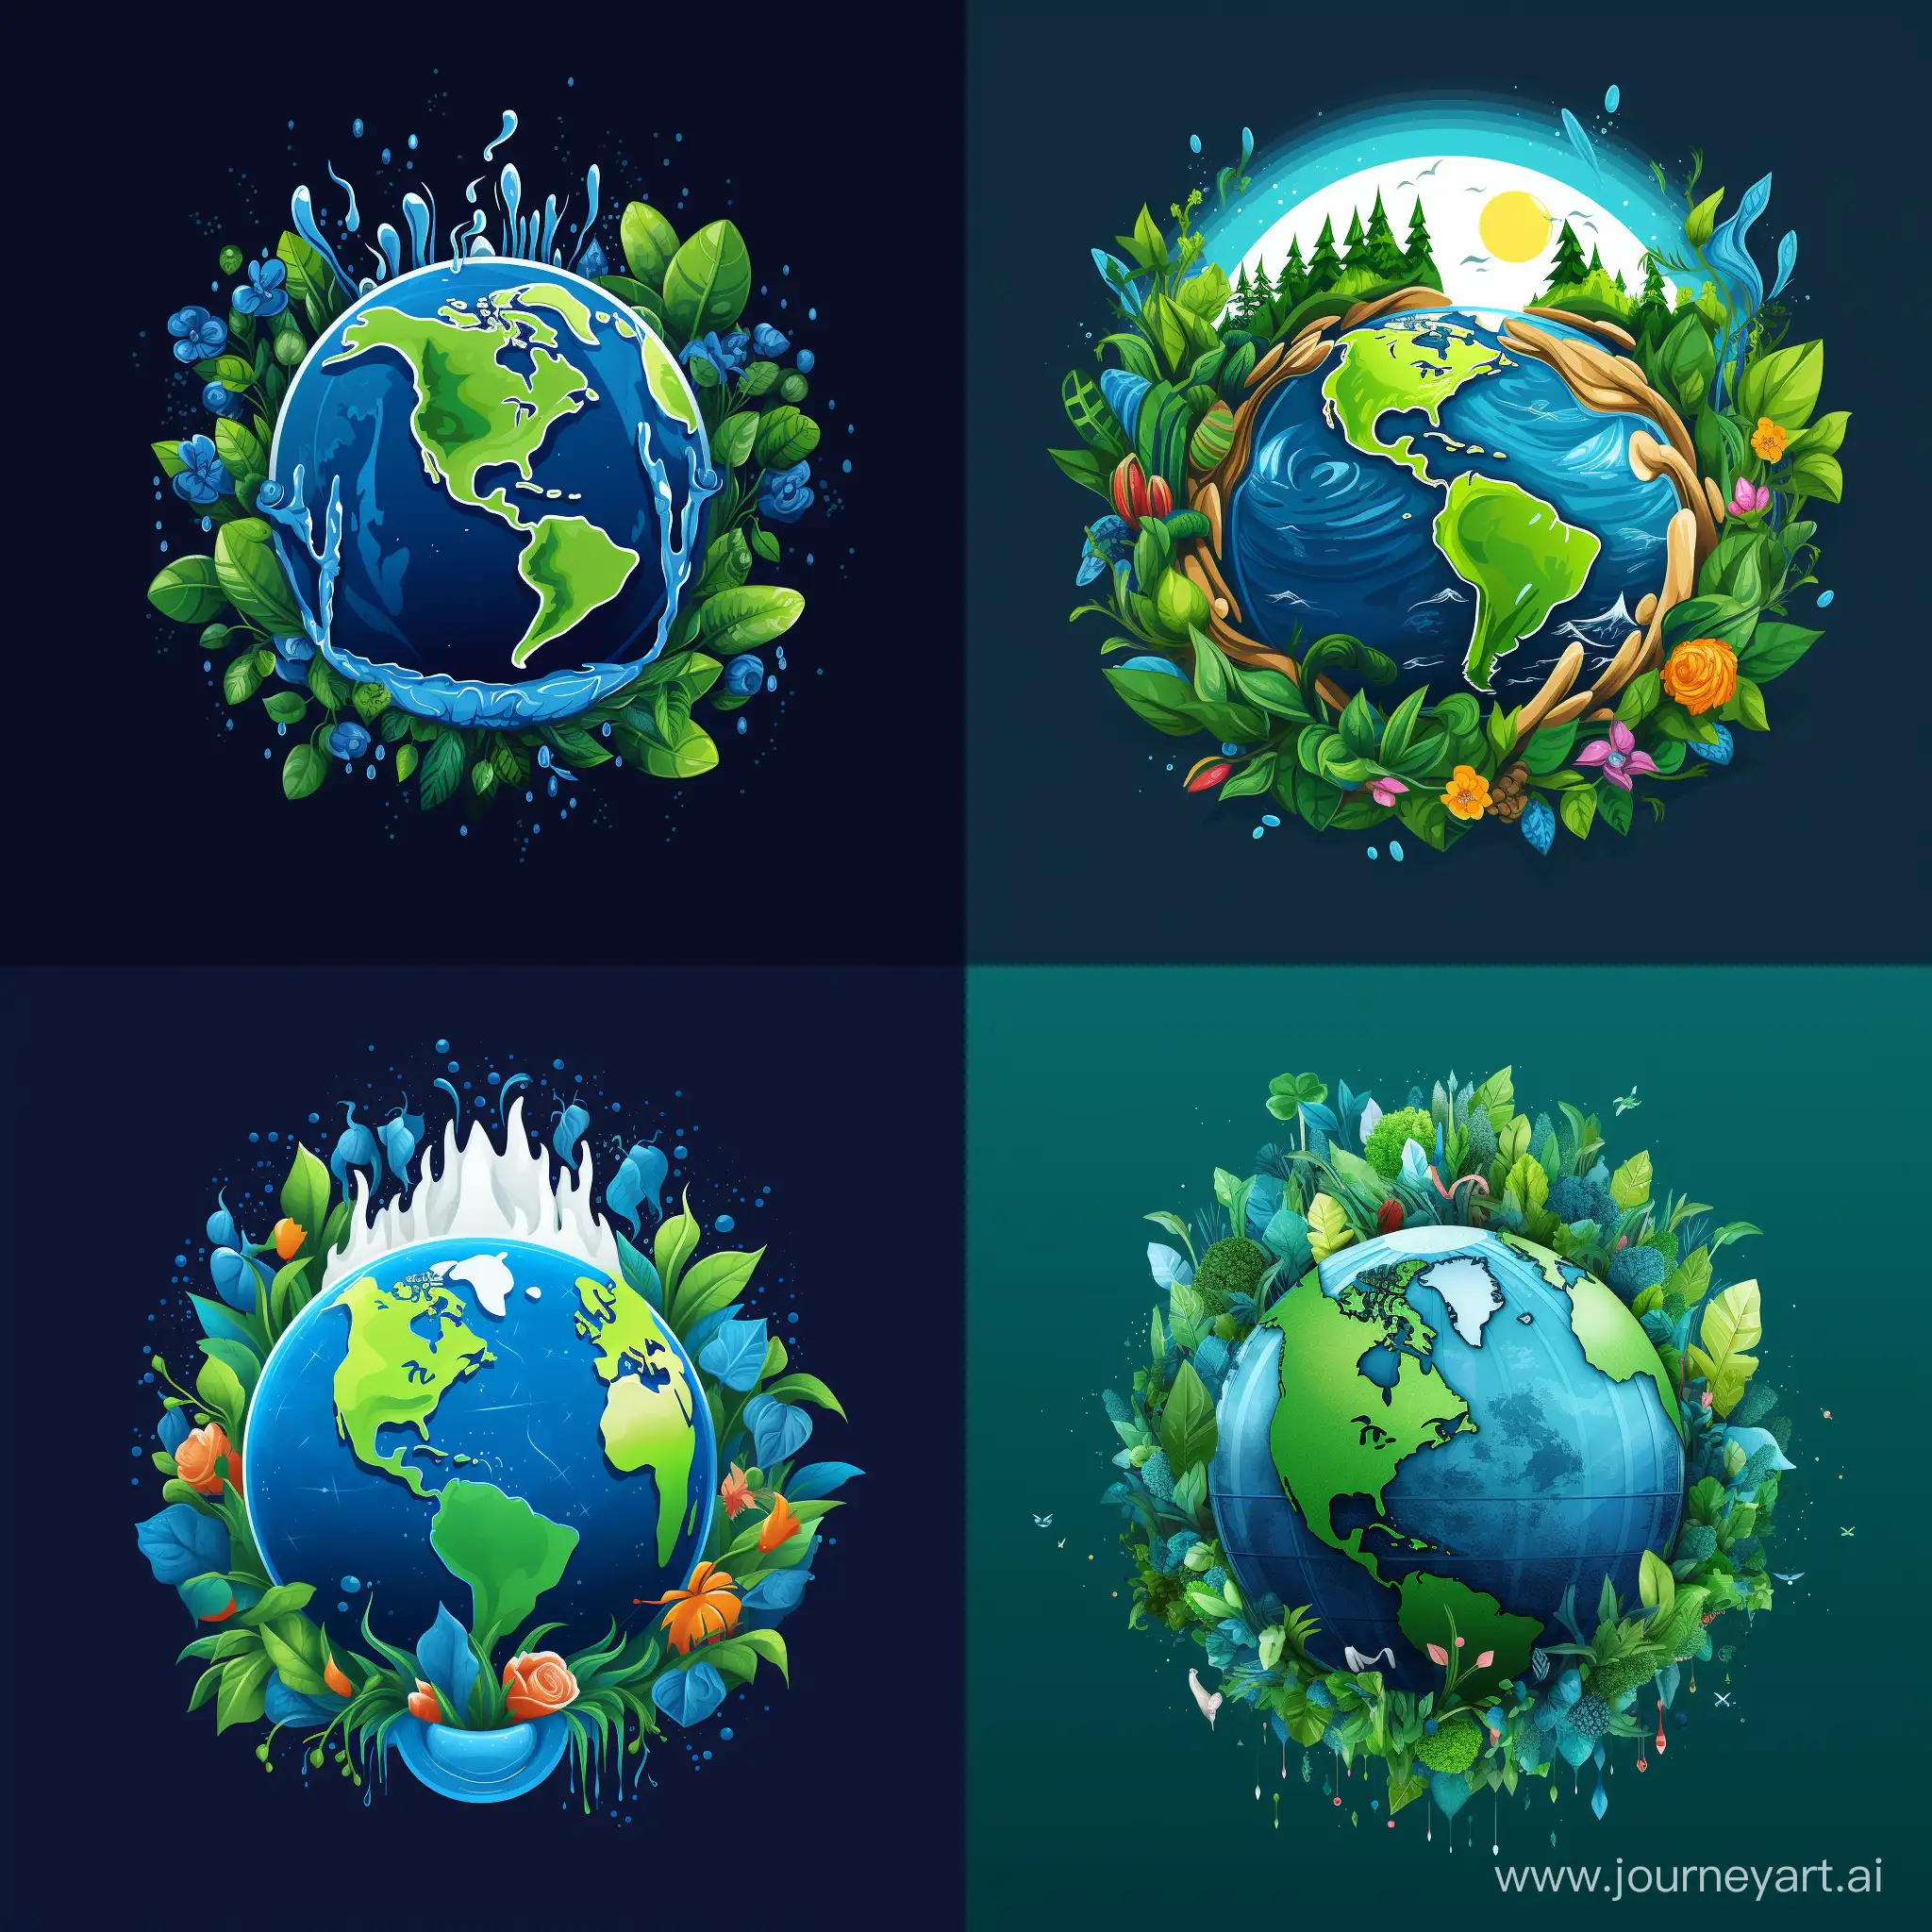 Generate a vibrant logo for Miracle NFT trading, illustrating Earth as the central element. Envision NFT raindrops falling, penetrating the Earth, sprouting into diverse forms, culminating in a striking display of the Three of Creation